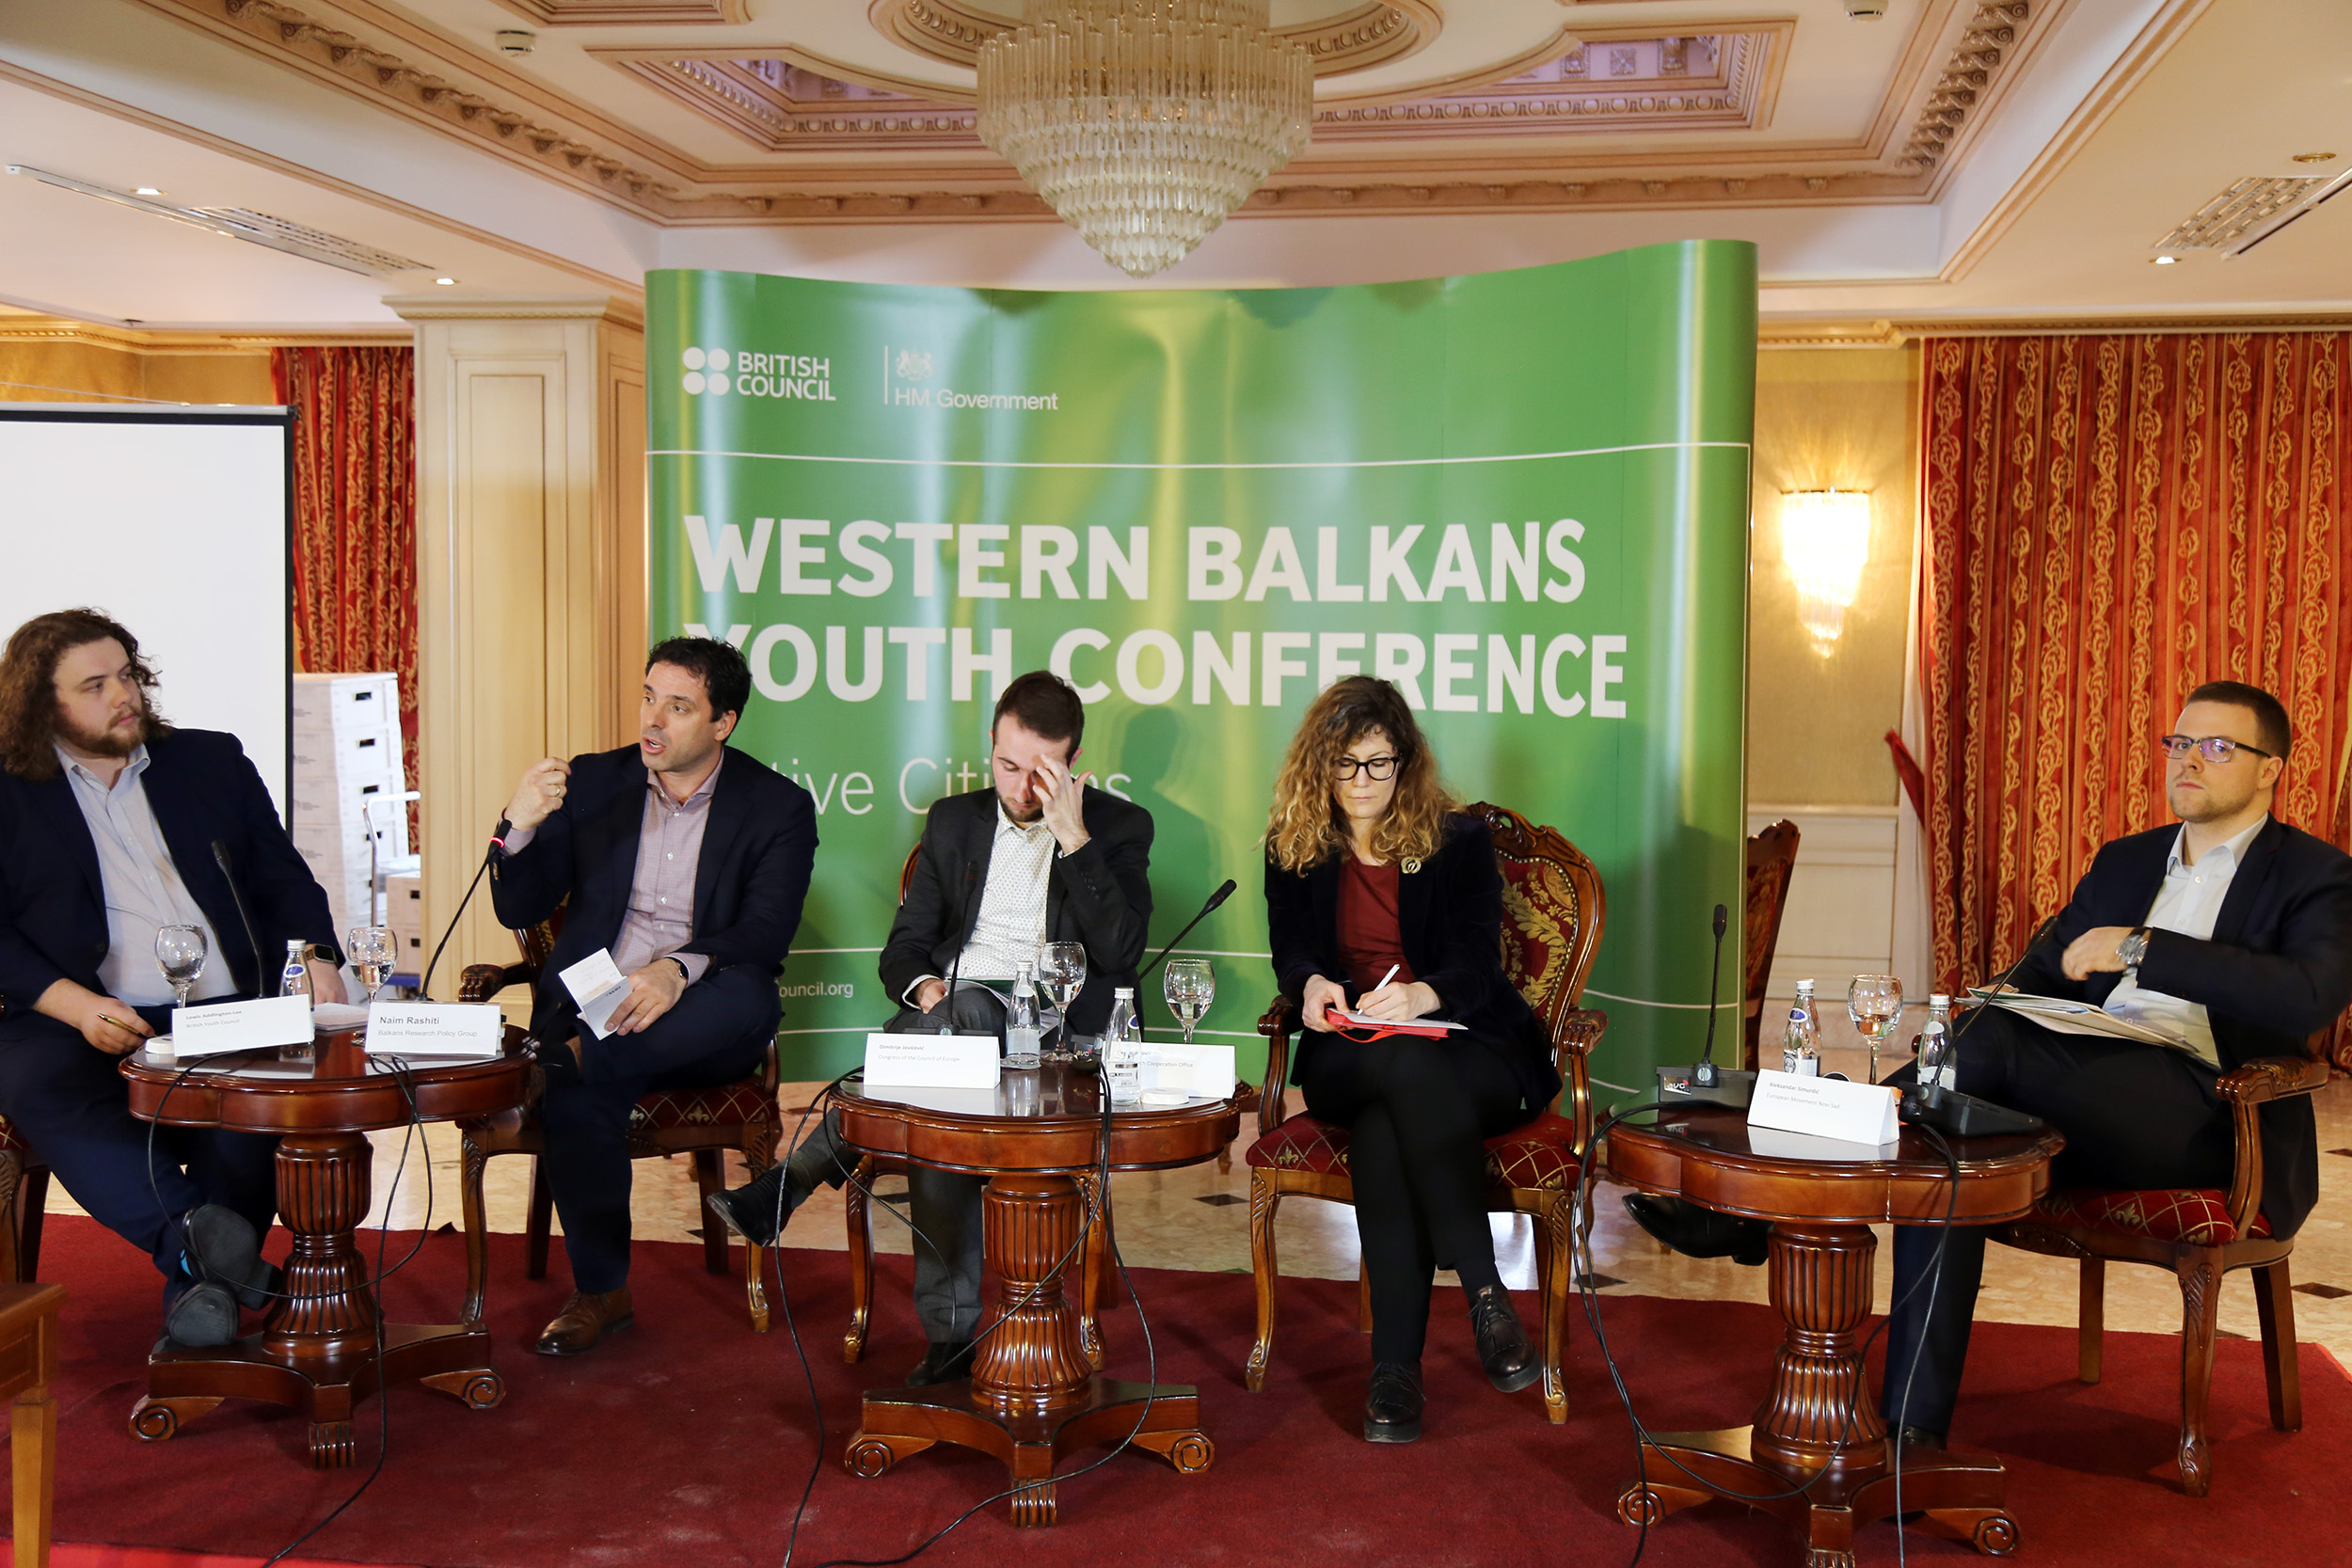 Western Balkans Youth Conference, ahead of London summit